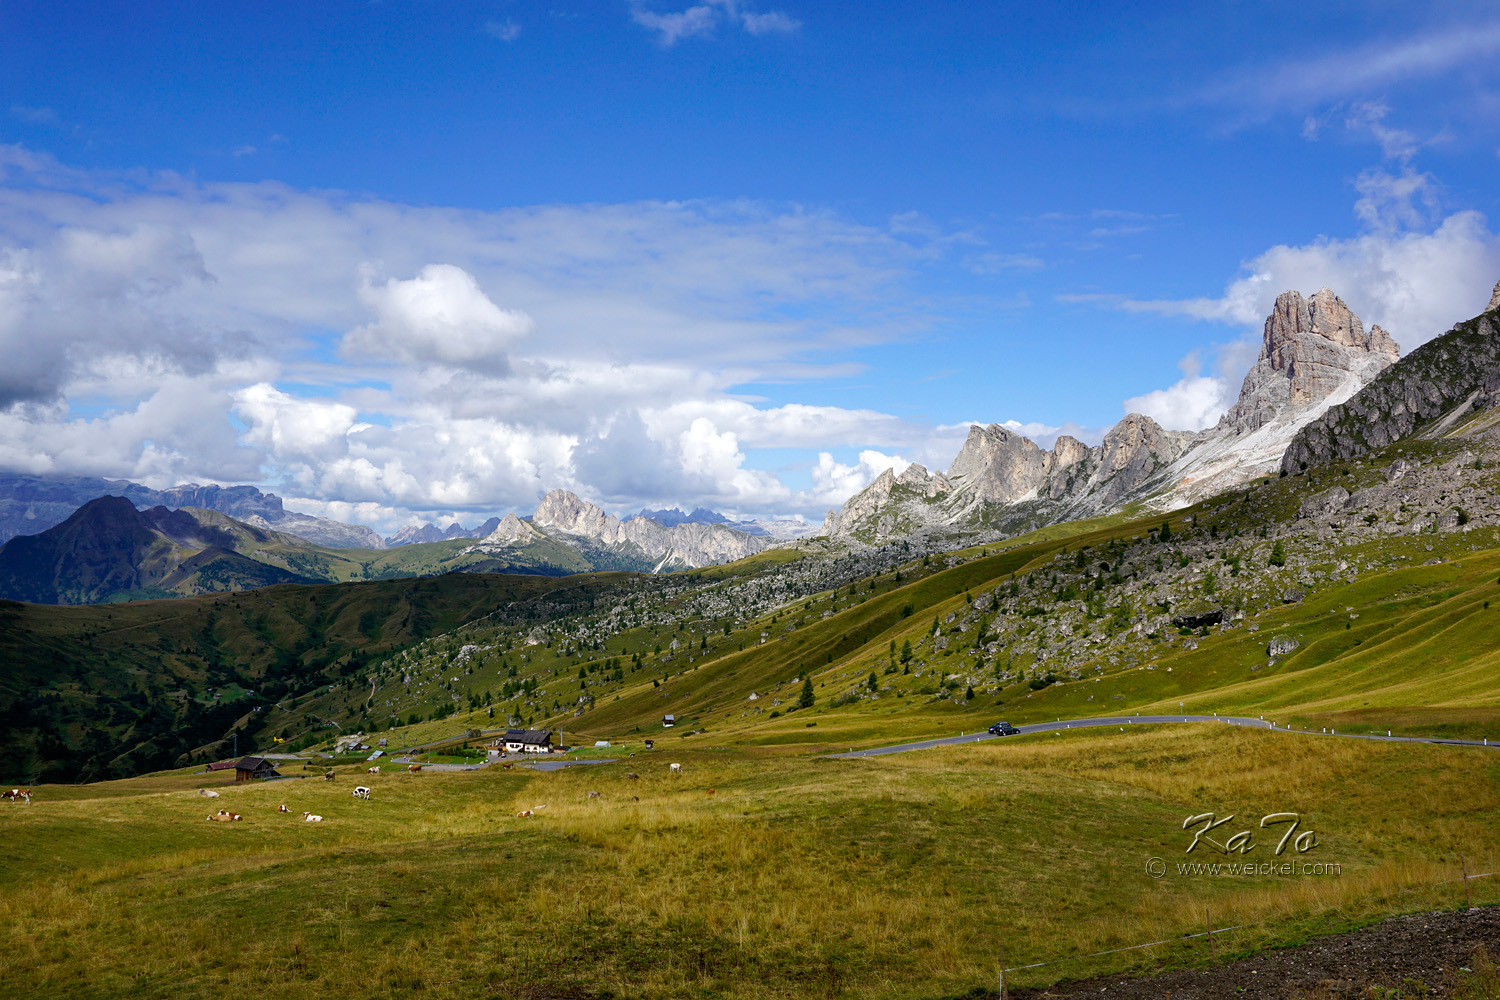 View from Passo di Giau